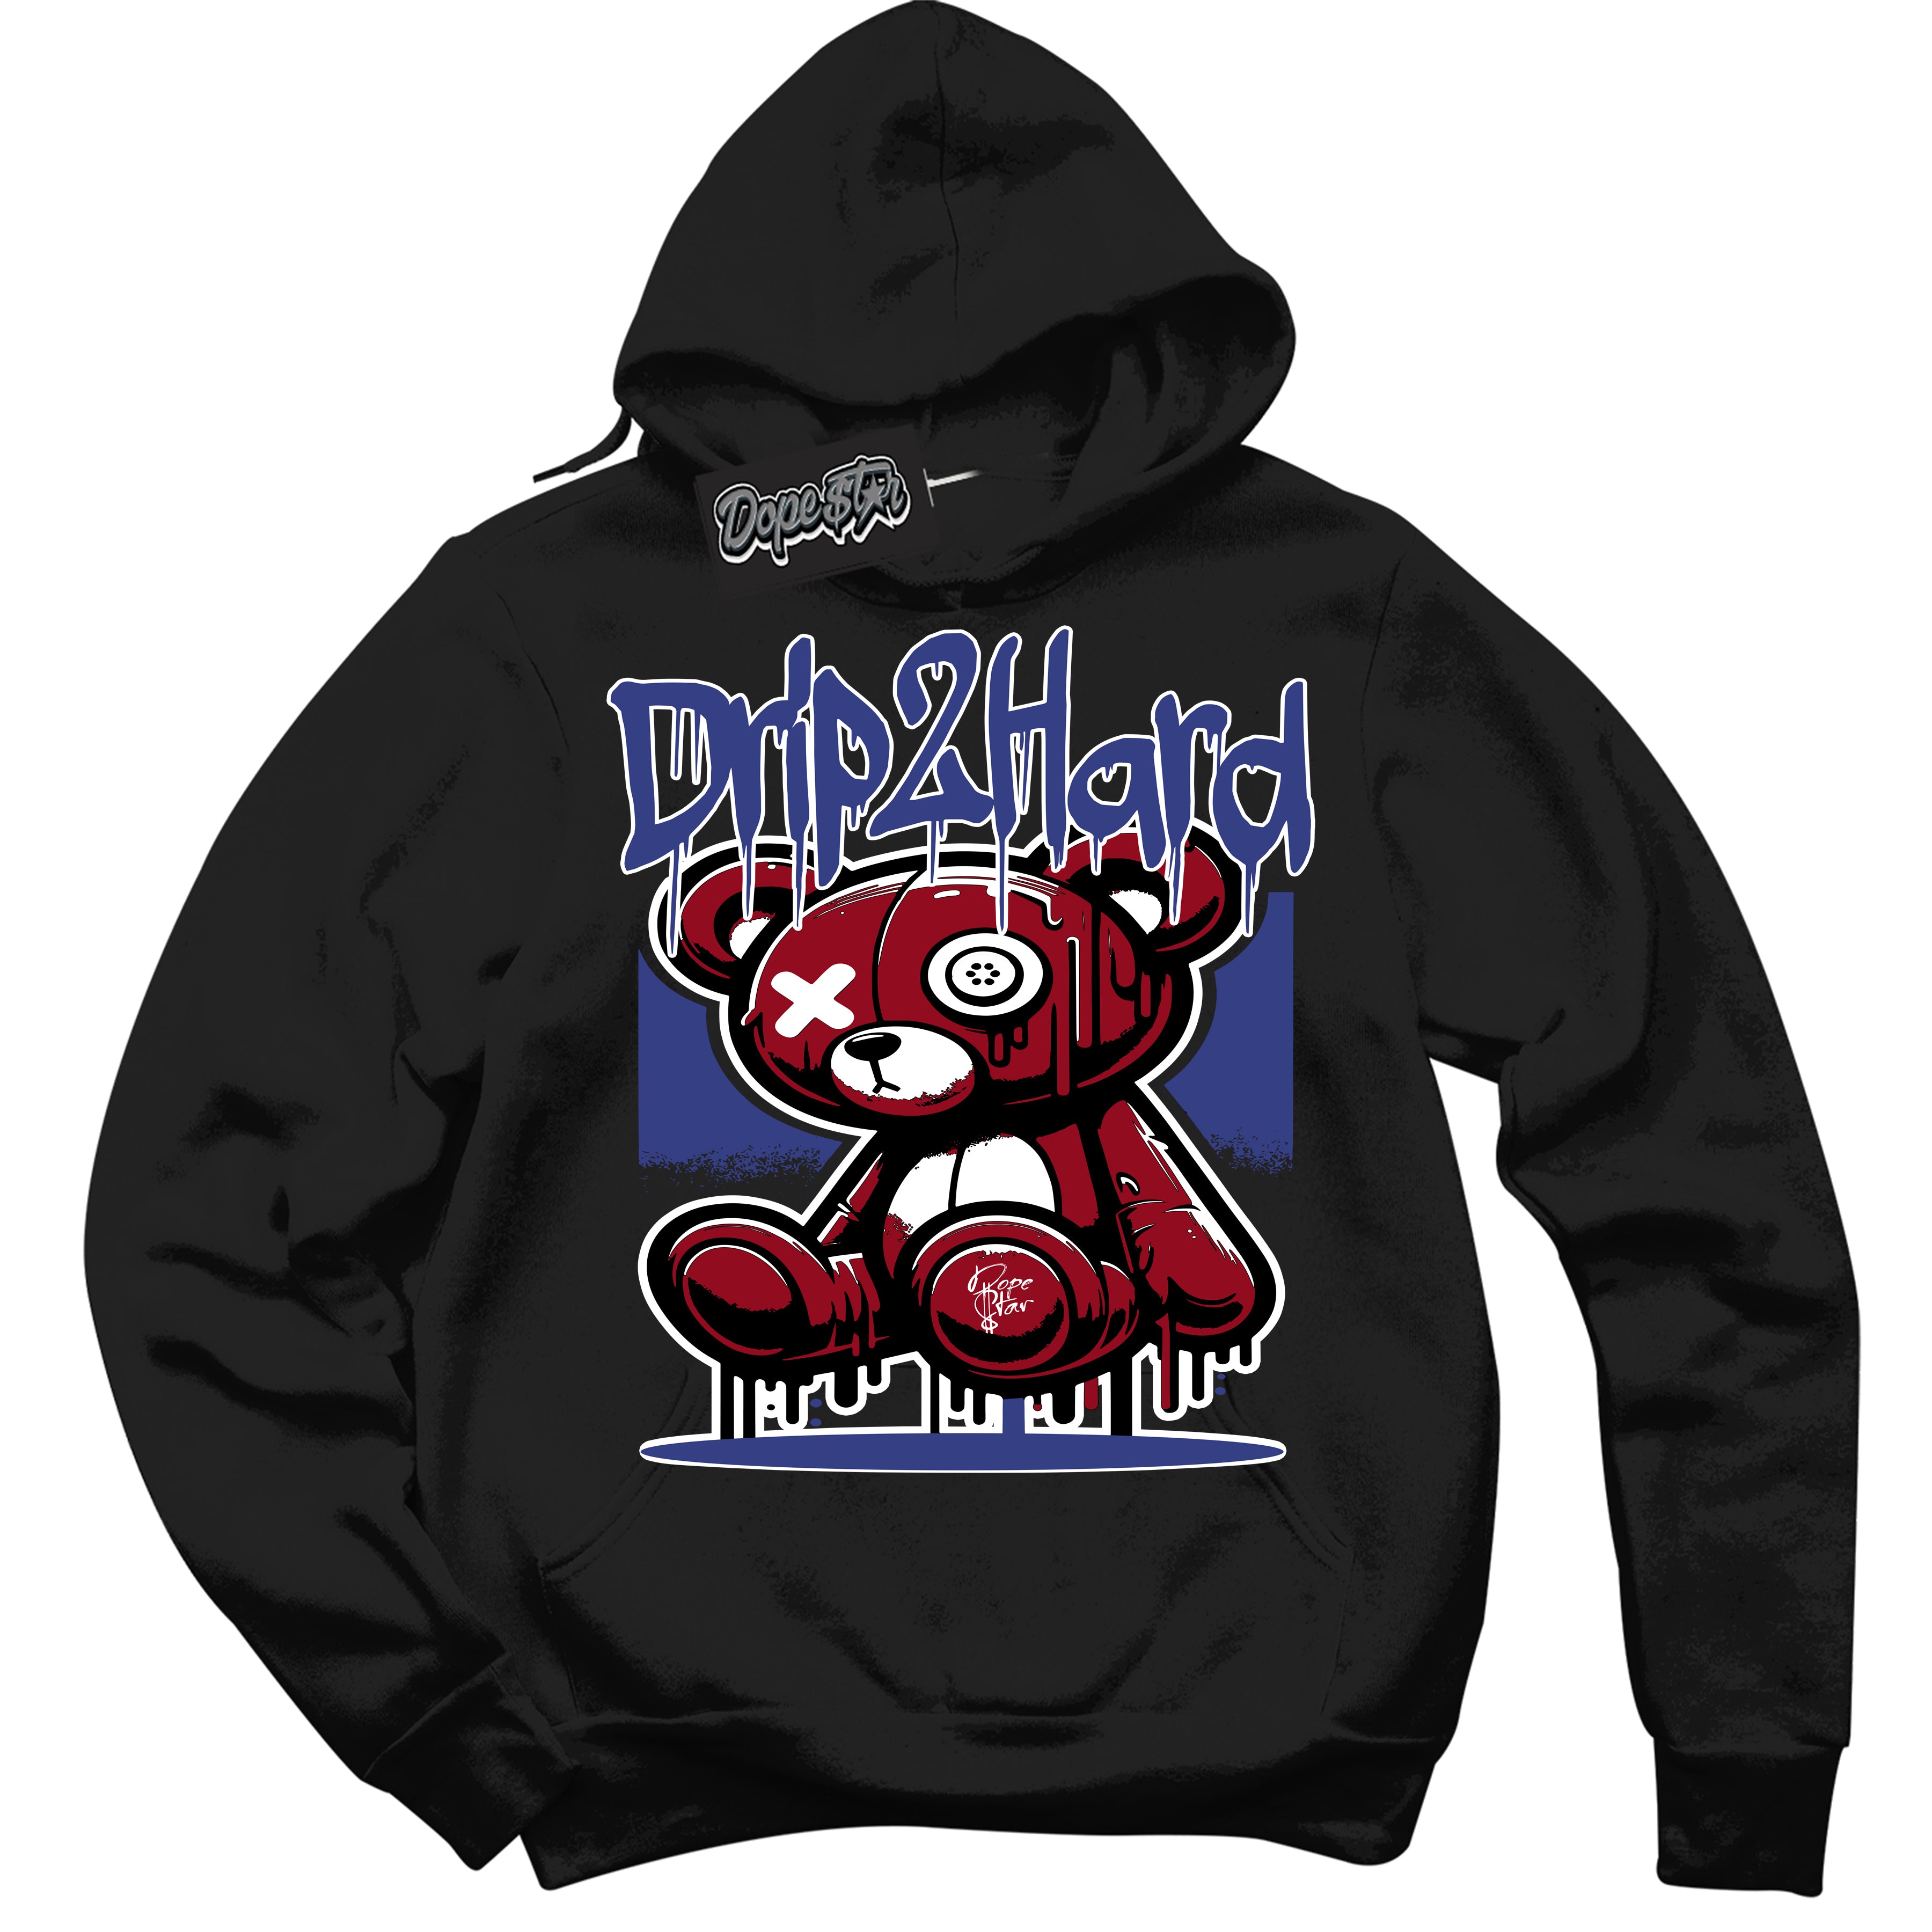 Cool Black Hoodie with “ Drip 2 Hard ”  design that Perfectly Matches Playoffs 8s Sneakers.